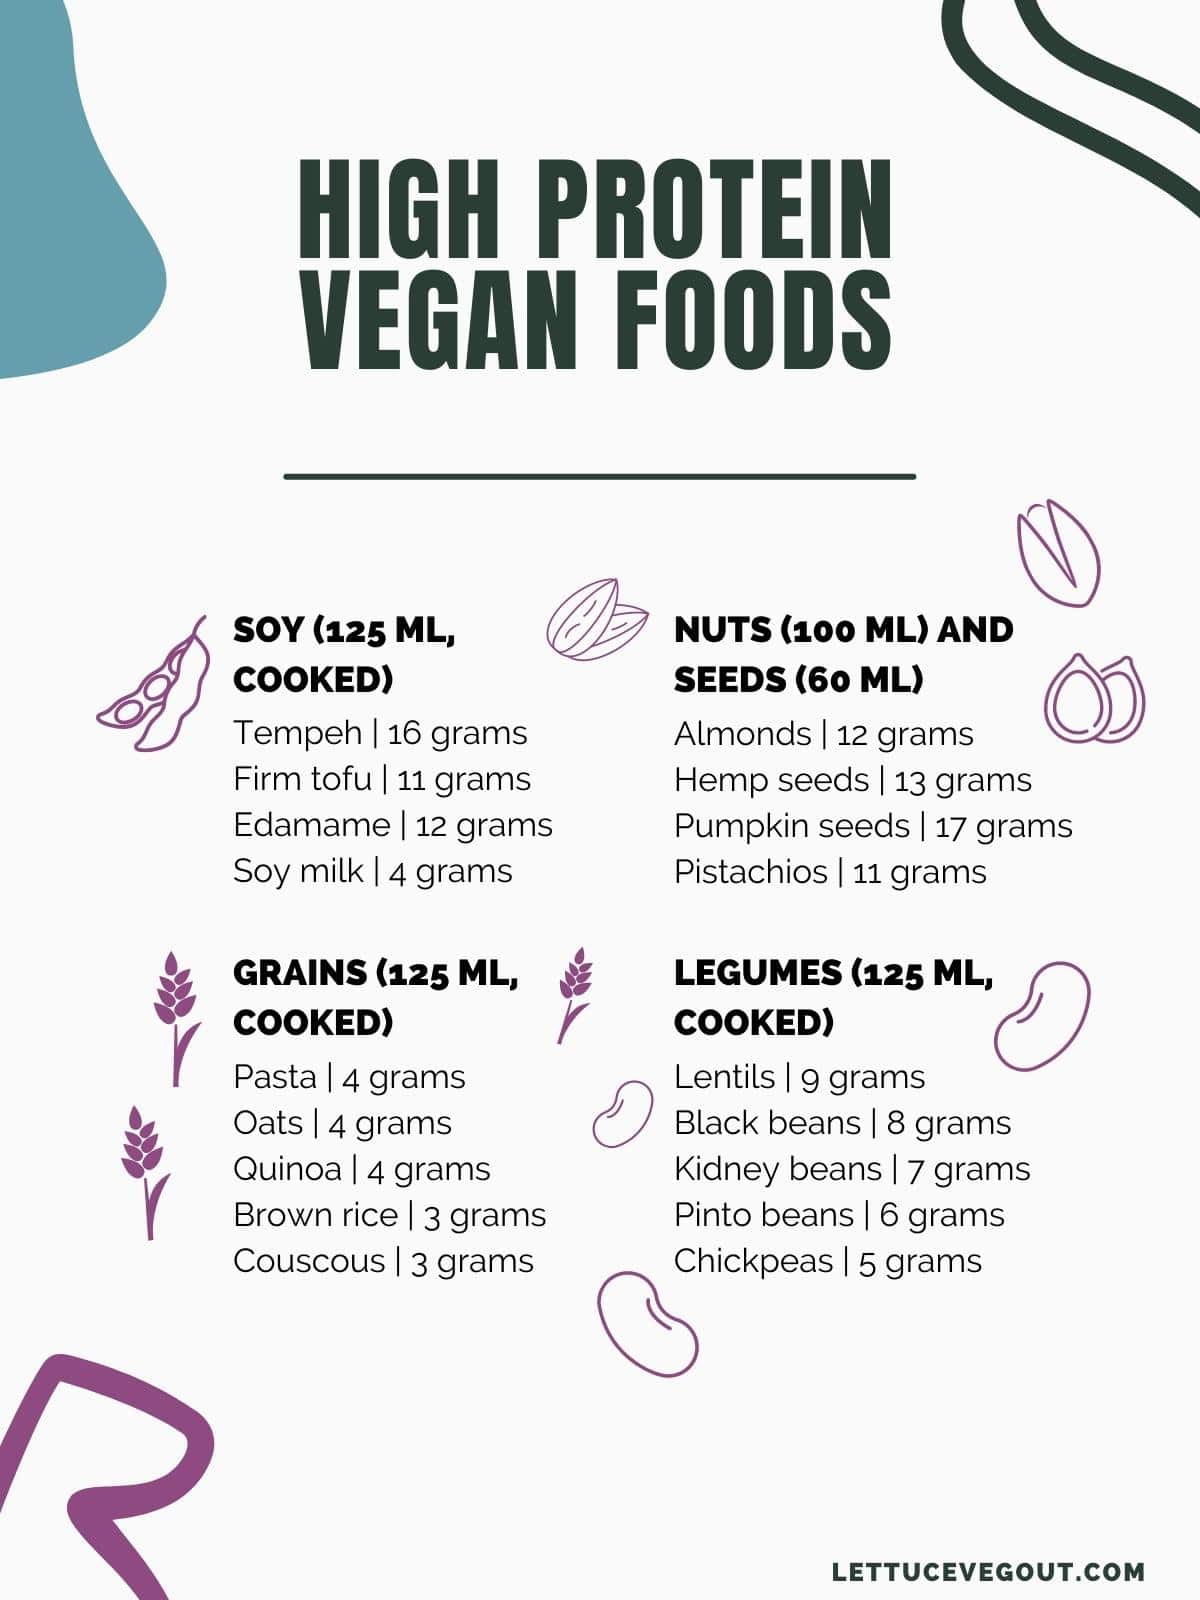 Infographic with high protein vegan foods listed.